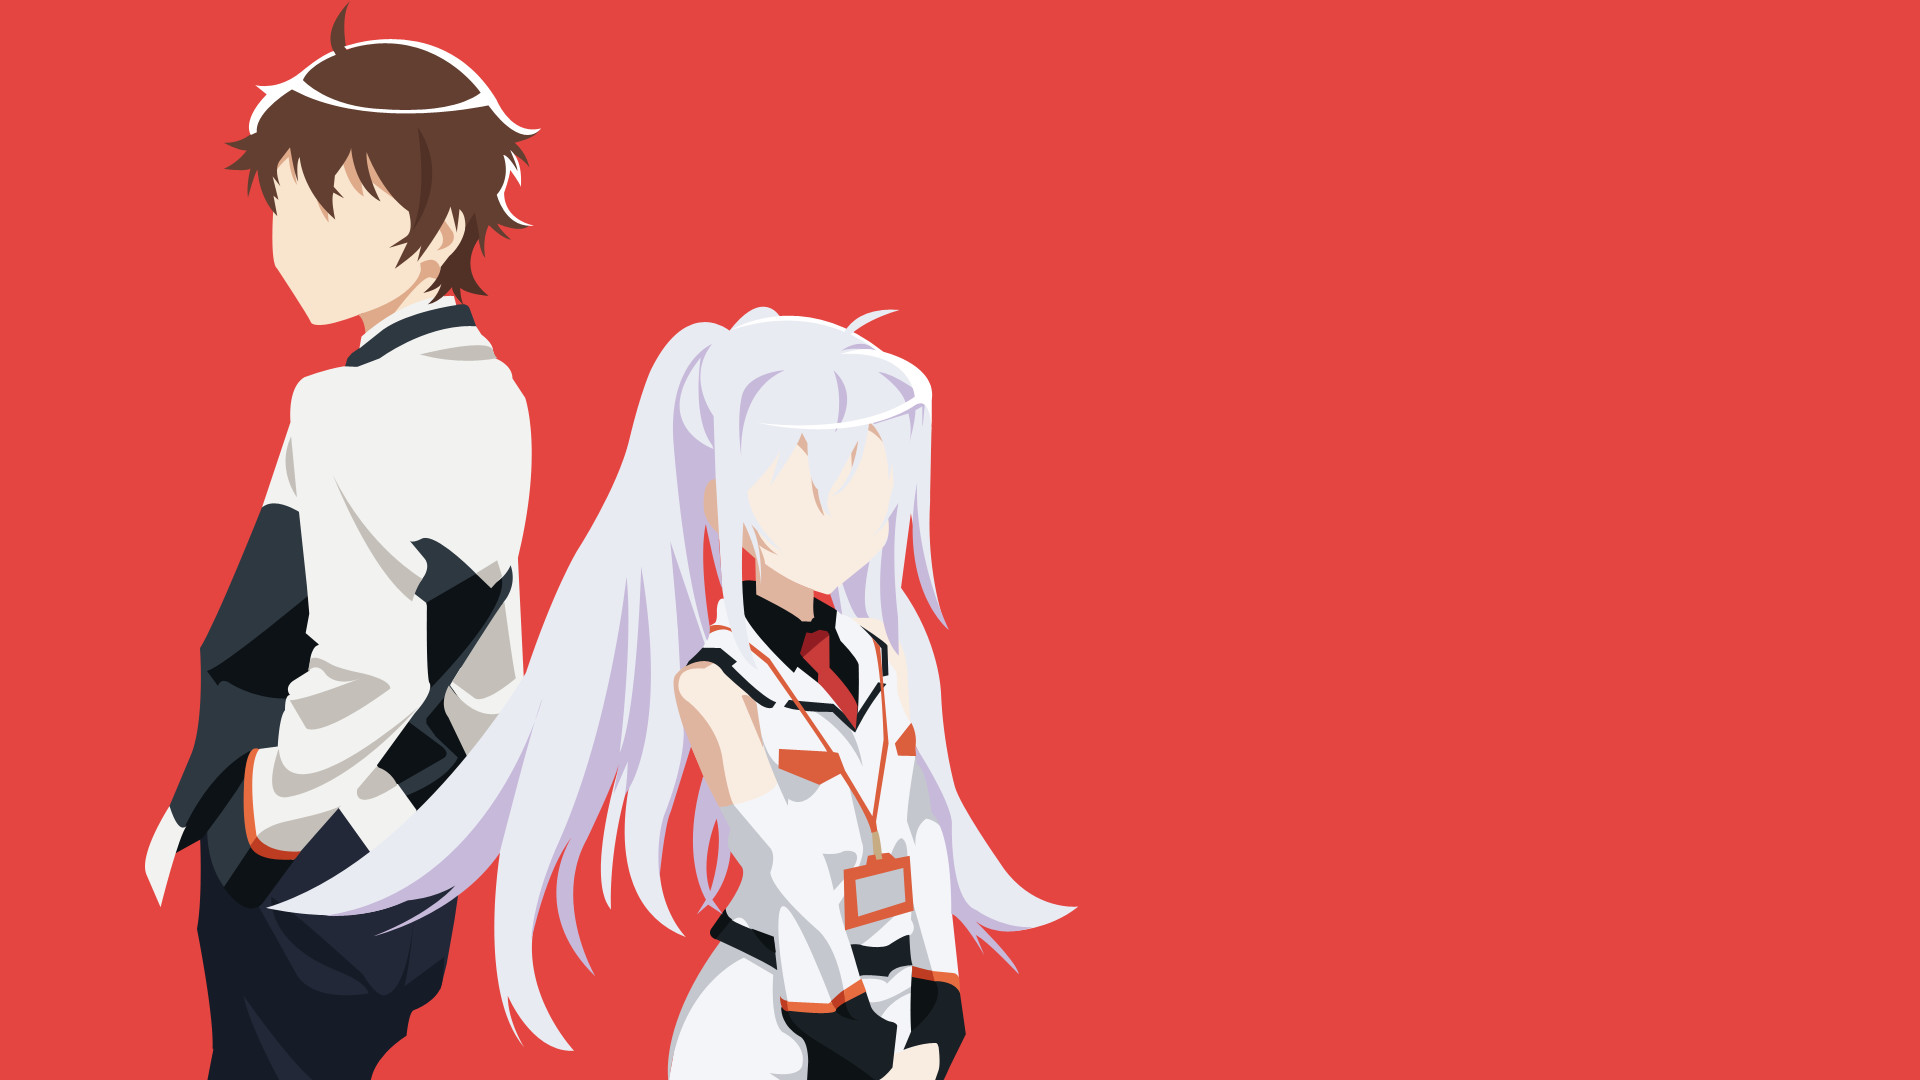 80+ Plastic Memories HD Wallpapers and Backgrounds